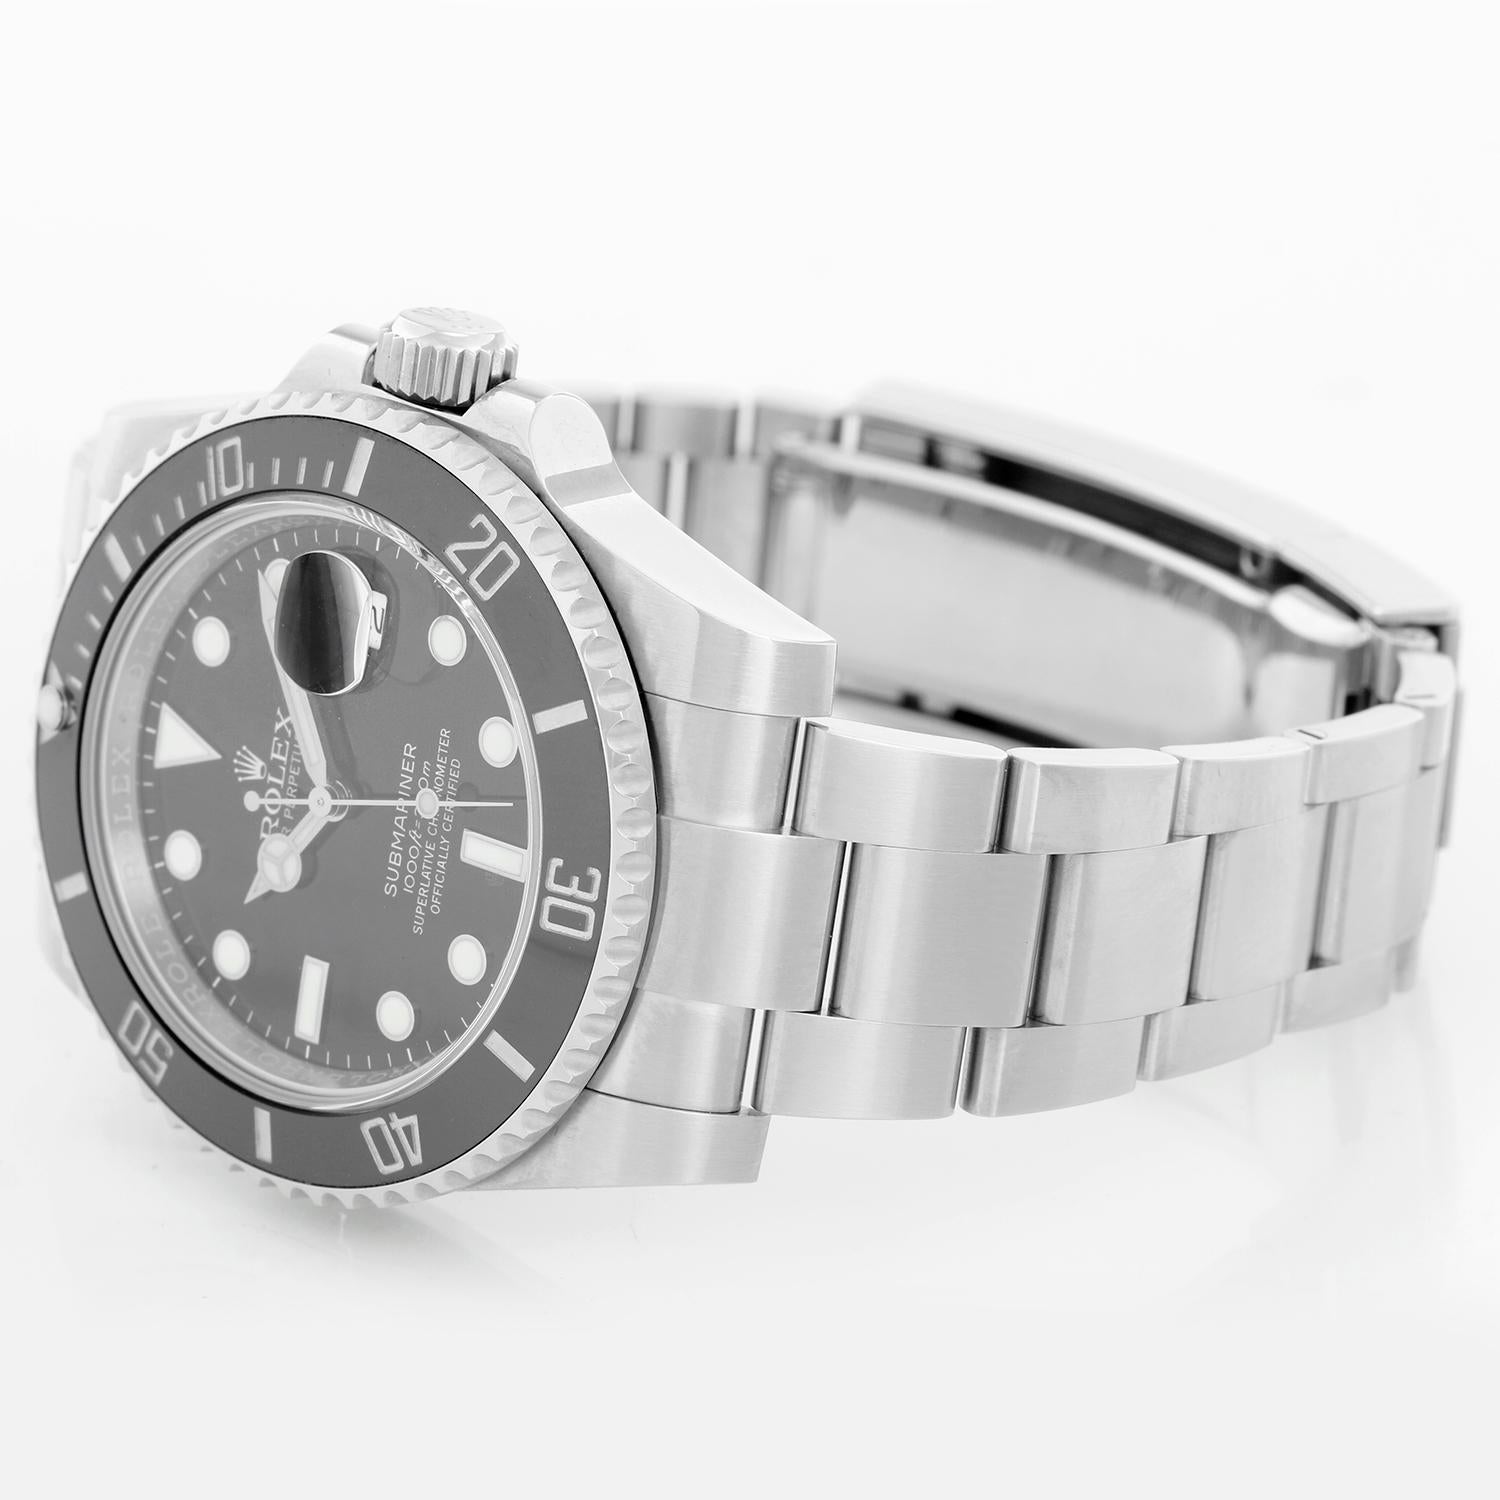 Rolex Submariner Date Men's Stainless Steel Watch 116610 LN - Automatic winding, 31 jewels, pressure proof to 1,000 feet. Stainless steel case with time-lapse Cerachrom bezel . Black dial with luminous markers; date at 3 o'clock. Stainless steel